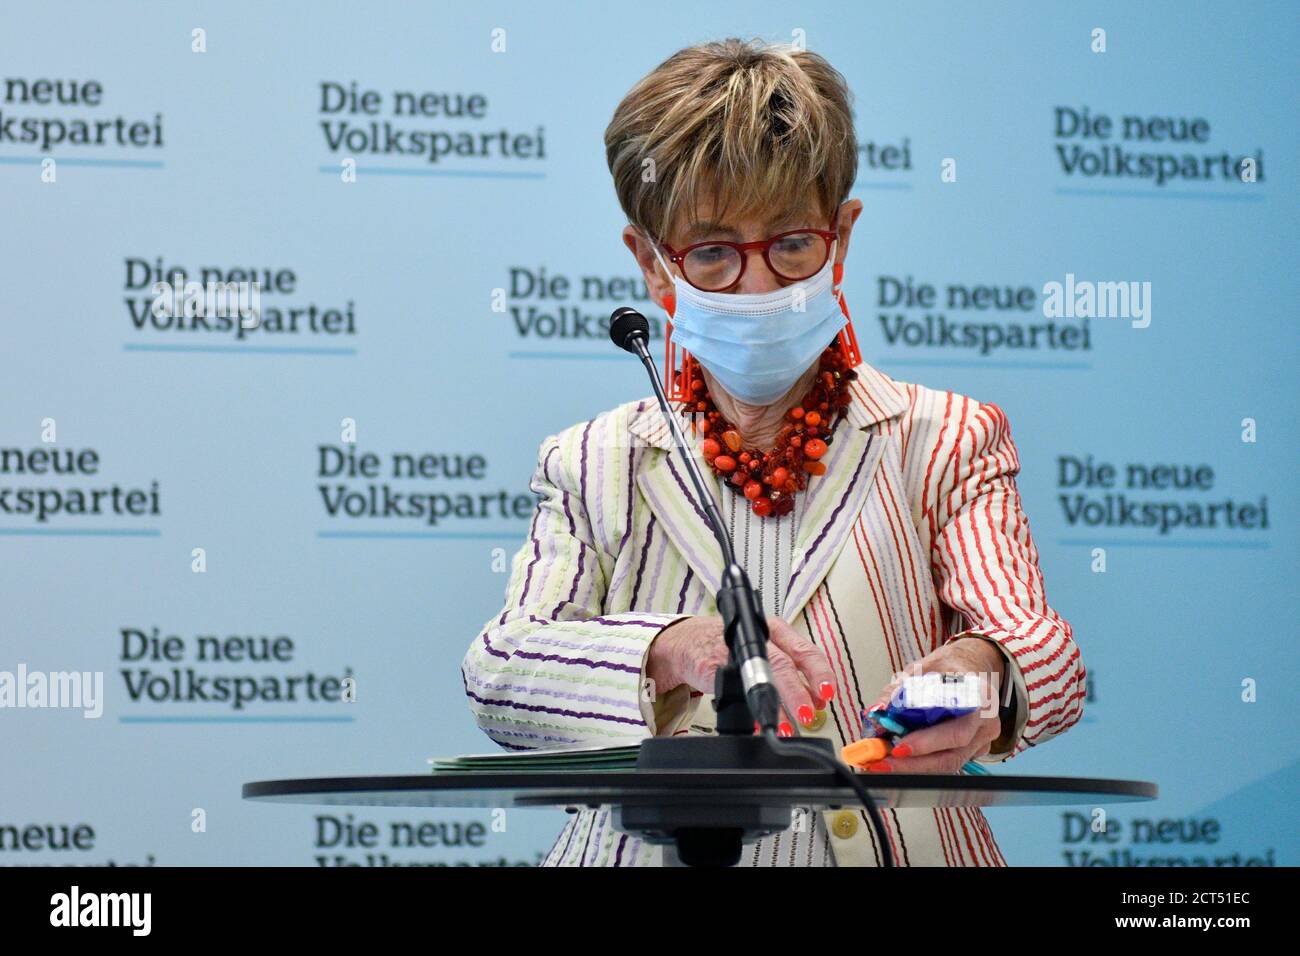 Vienna, Austria. 21th Sep, 2020. Press conference with ÖVP (New People's Party Vienna) Health spokeswoman Ingrid Korosec. The new People's Party of Vienna presents a comprehensive package of measures to cope with the Corona crisis in Vienna. Credit: Franz Perc / Alamy Live News Stock Photo